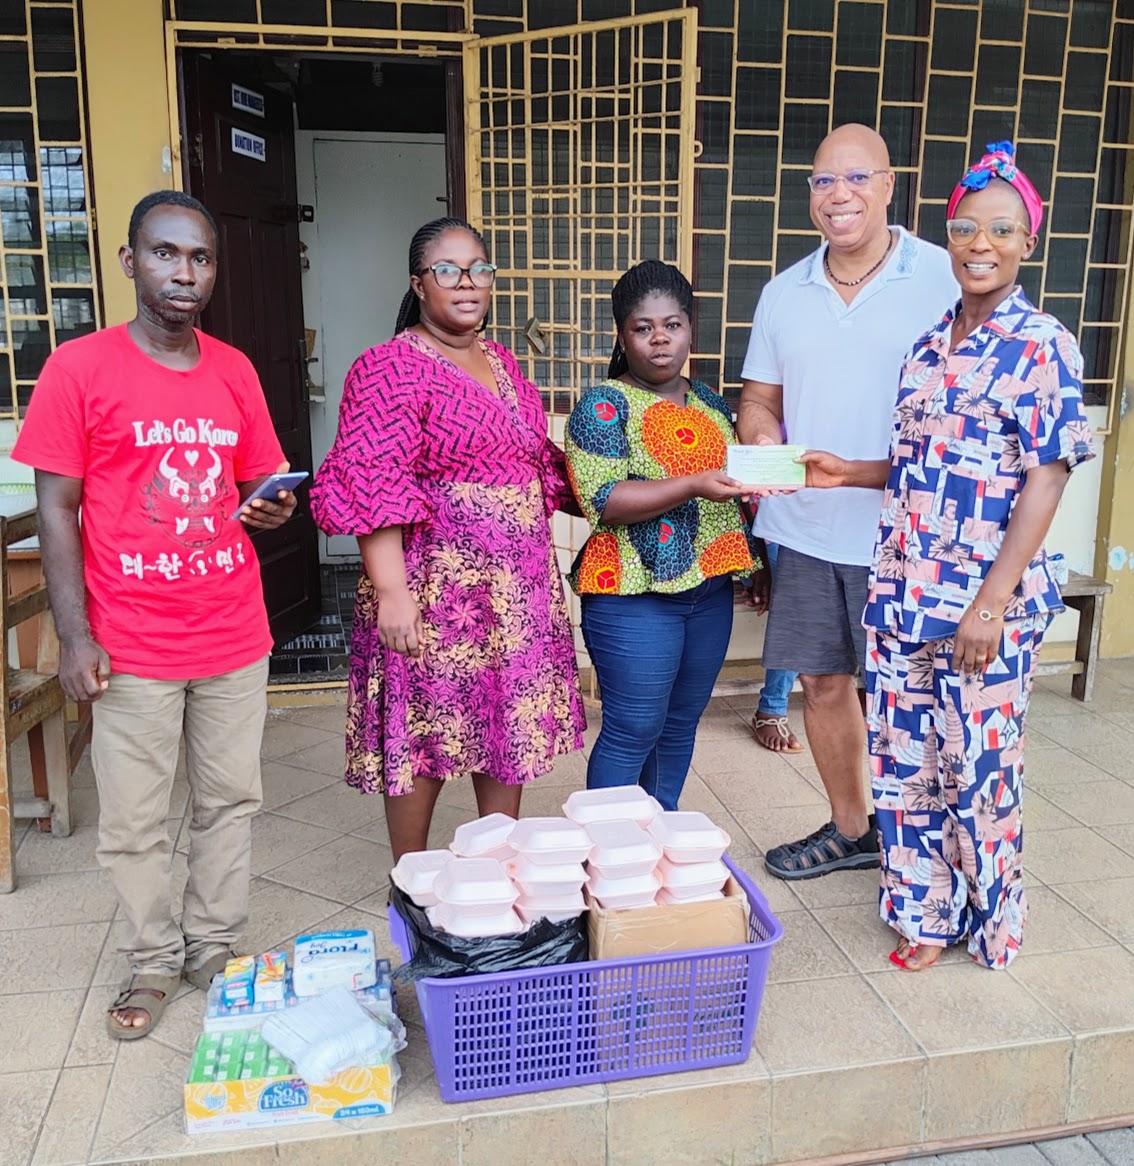 In Ghana, Kevin and new crew prepare and deliver 50 hot meals to orphanage